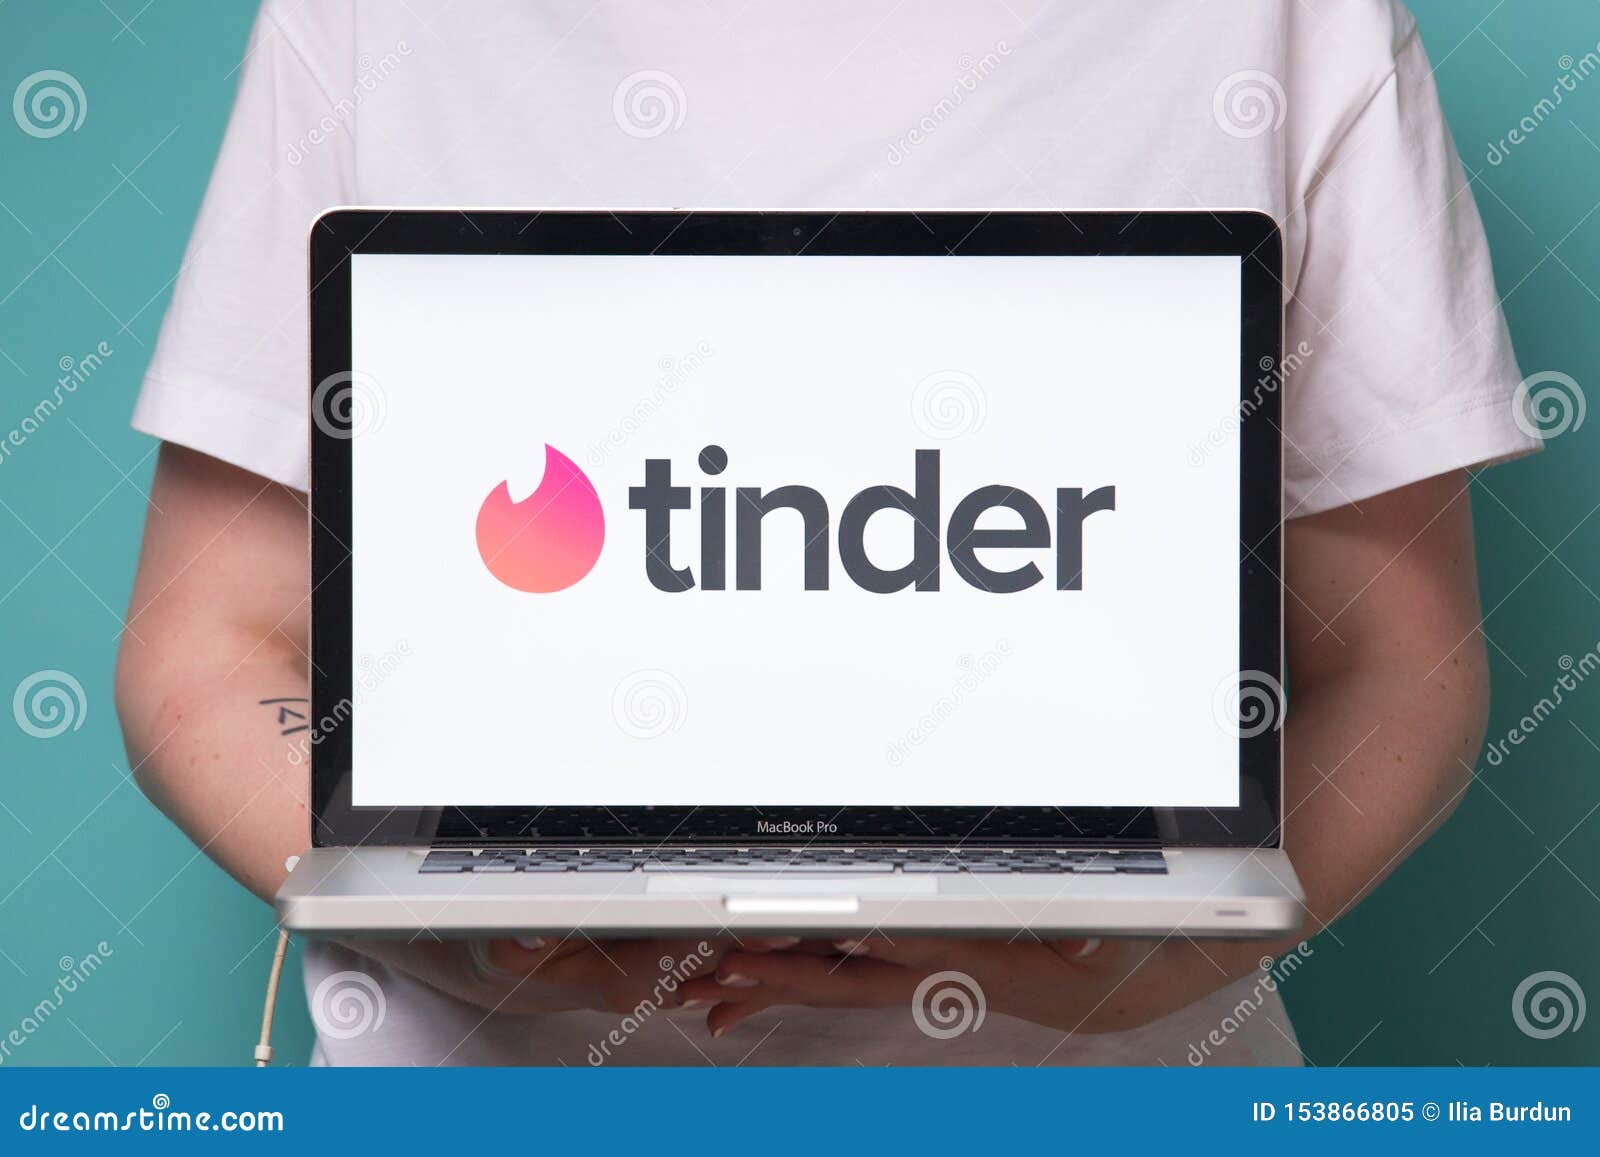 How to log out of tinder on laptop